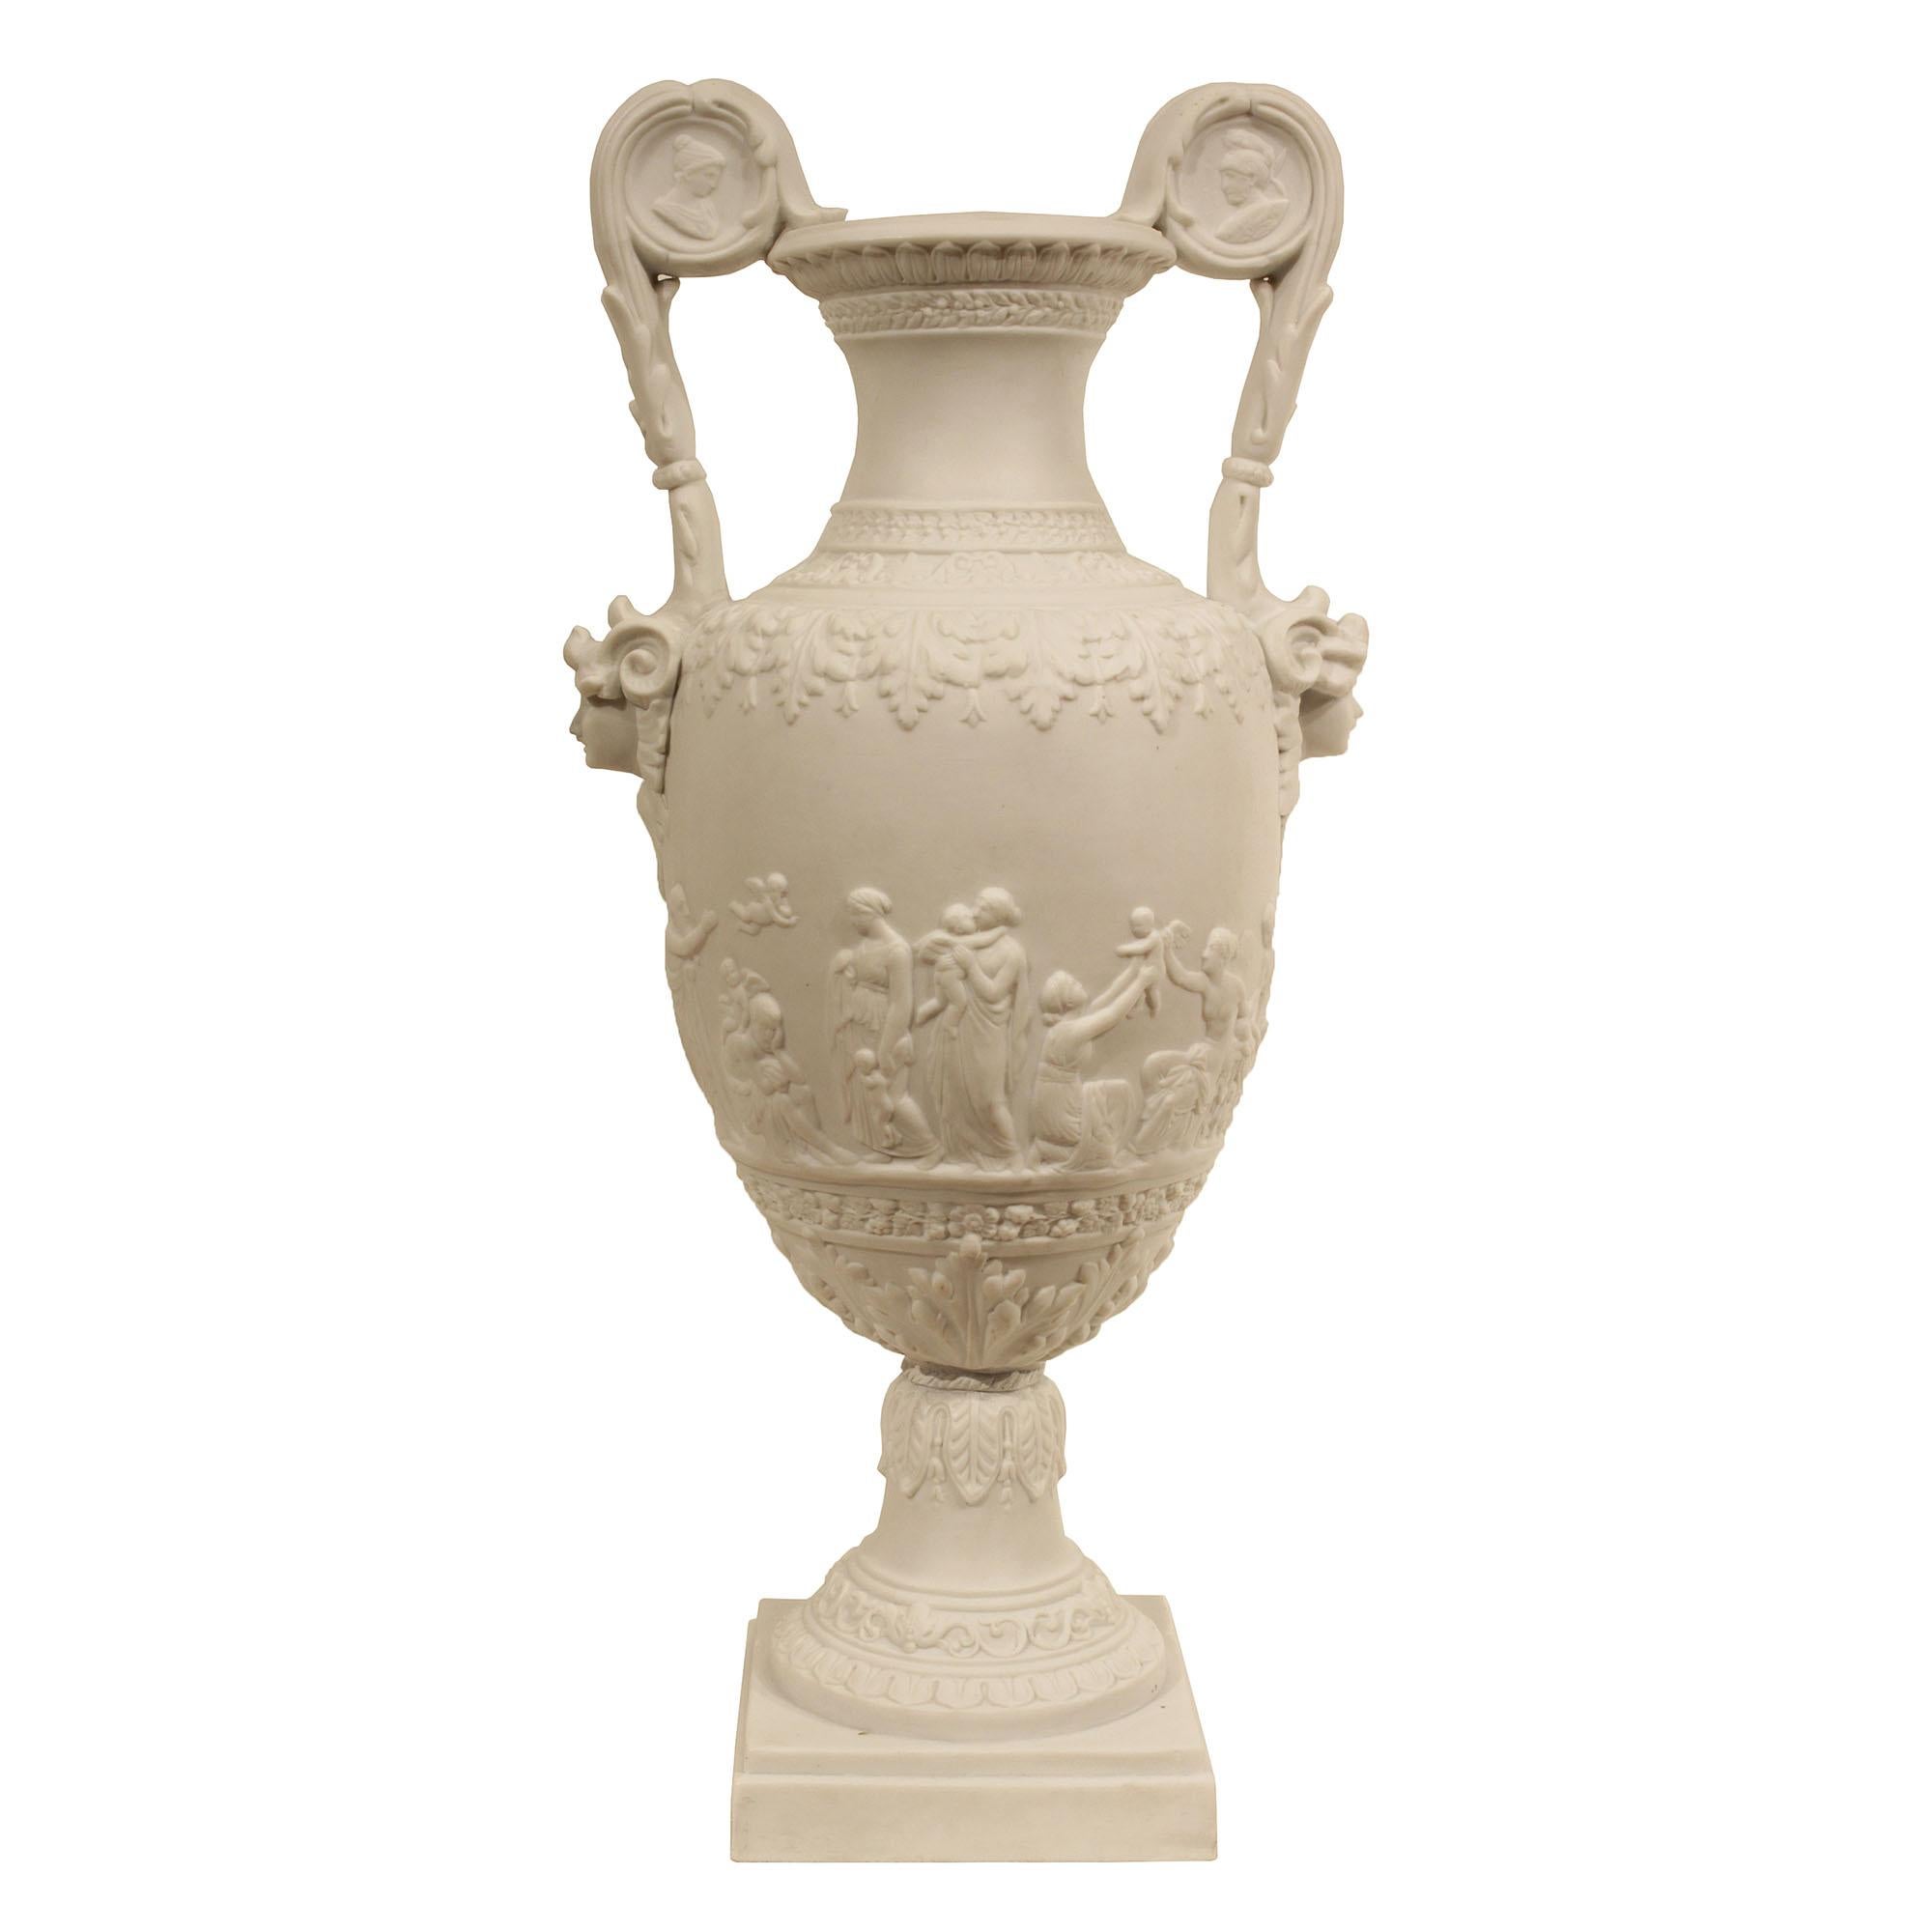 A pair of 19th century Louis XVI st. Biscuit de Sèvres porcelain urns. Each urn is raised on a mottled square base below the socle decorated with a rai de coeur design below a scrolling garland and acanthus leaves. The urn above displays maidens